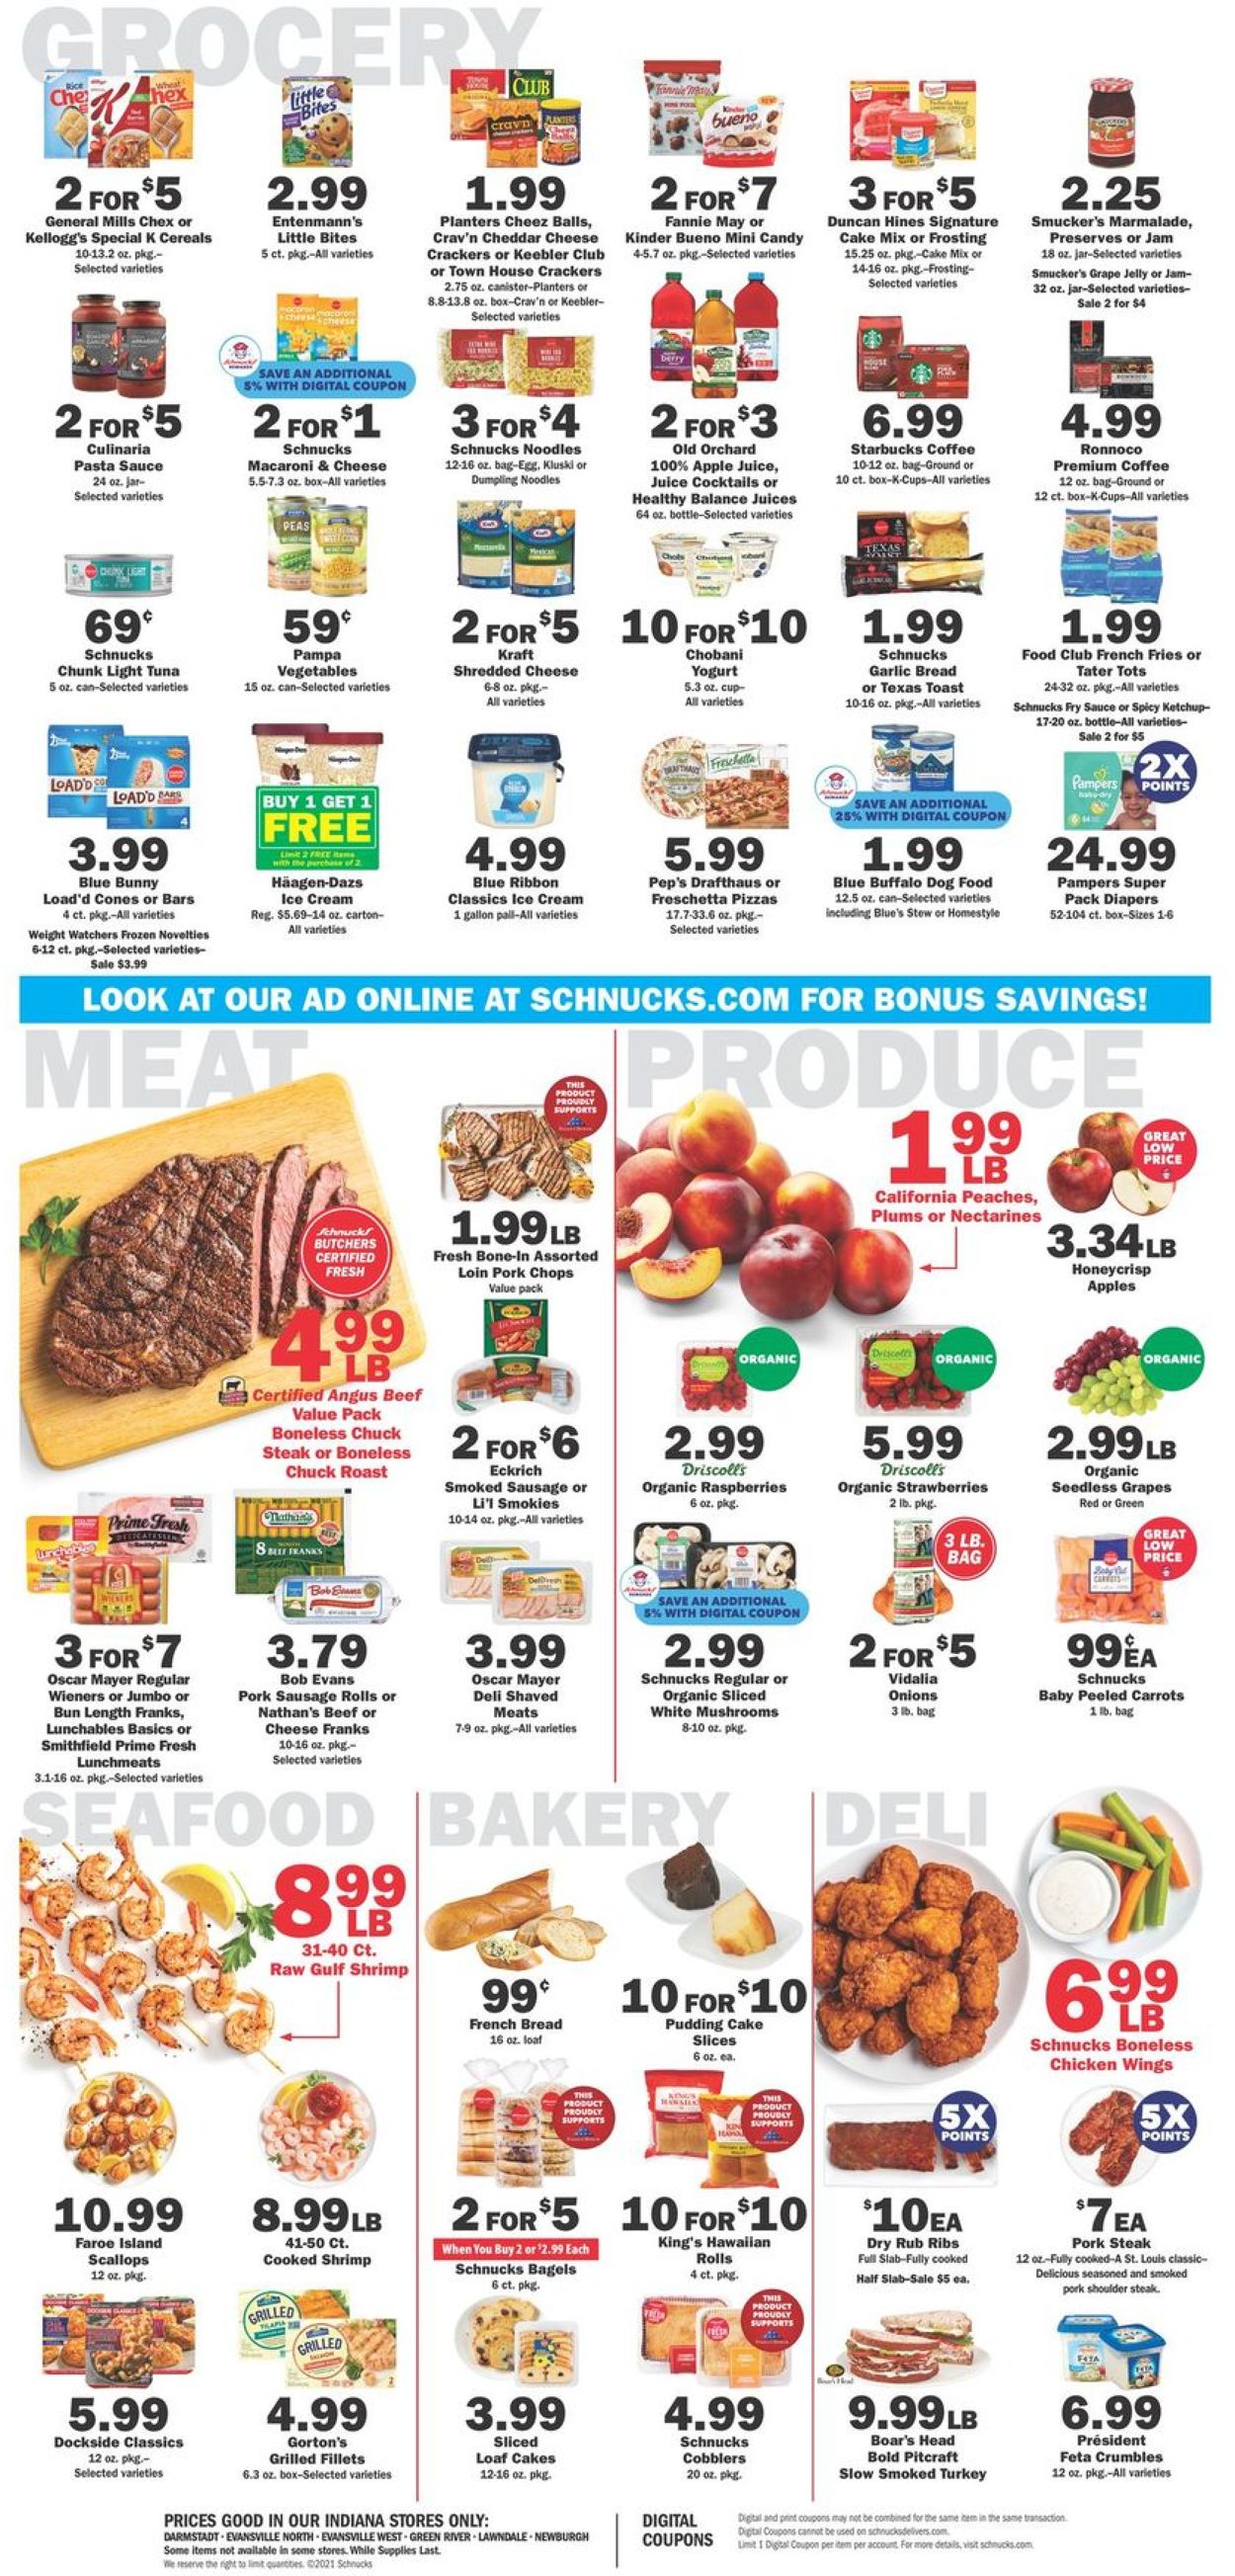 Schnucks Current weekly ad 06/09 - 06/15/2021 [4] - frequent-ads.com